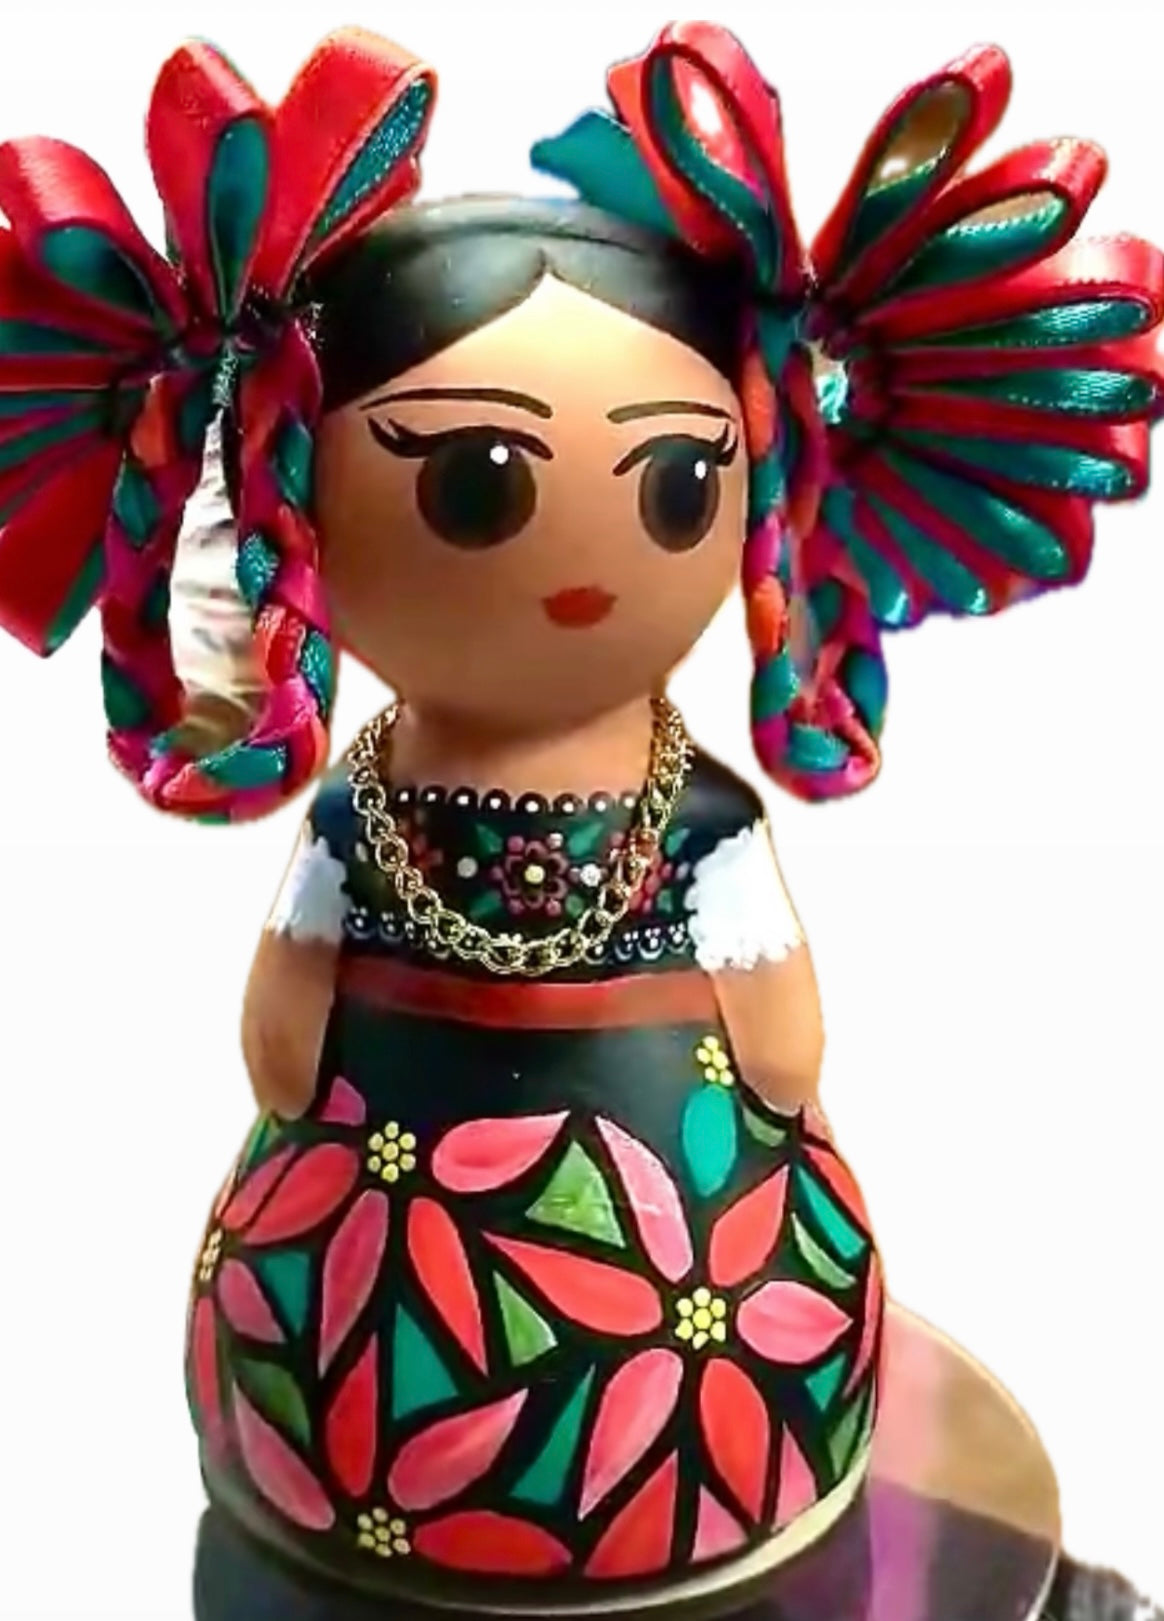 Mexican Handmade Clay Folklore Figurines- Sonora